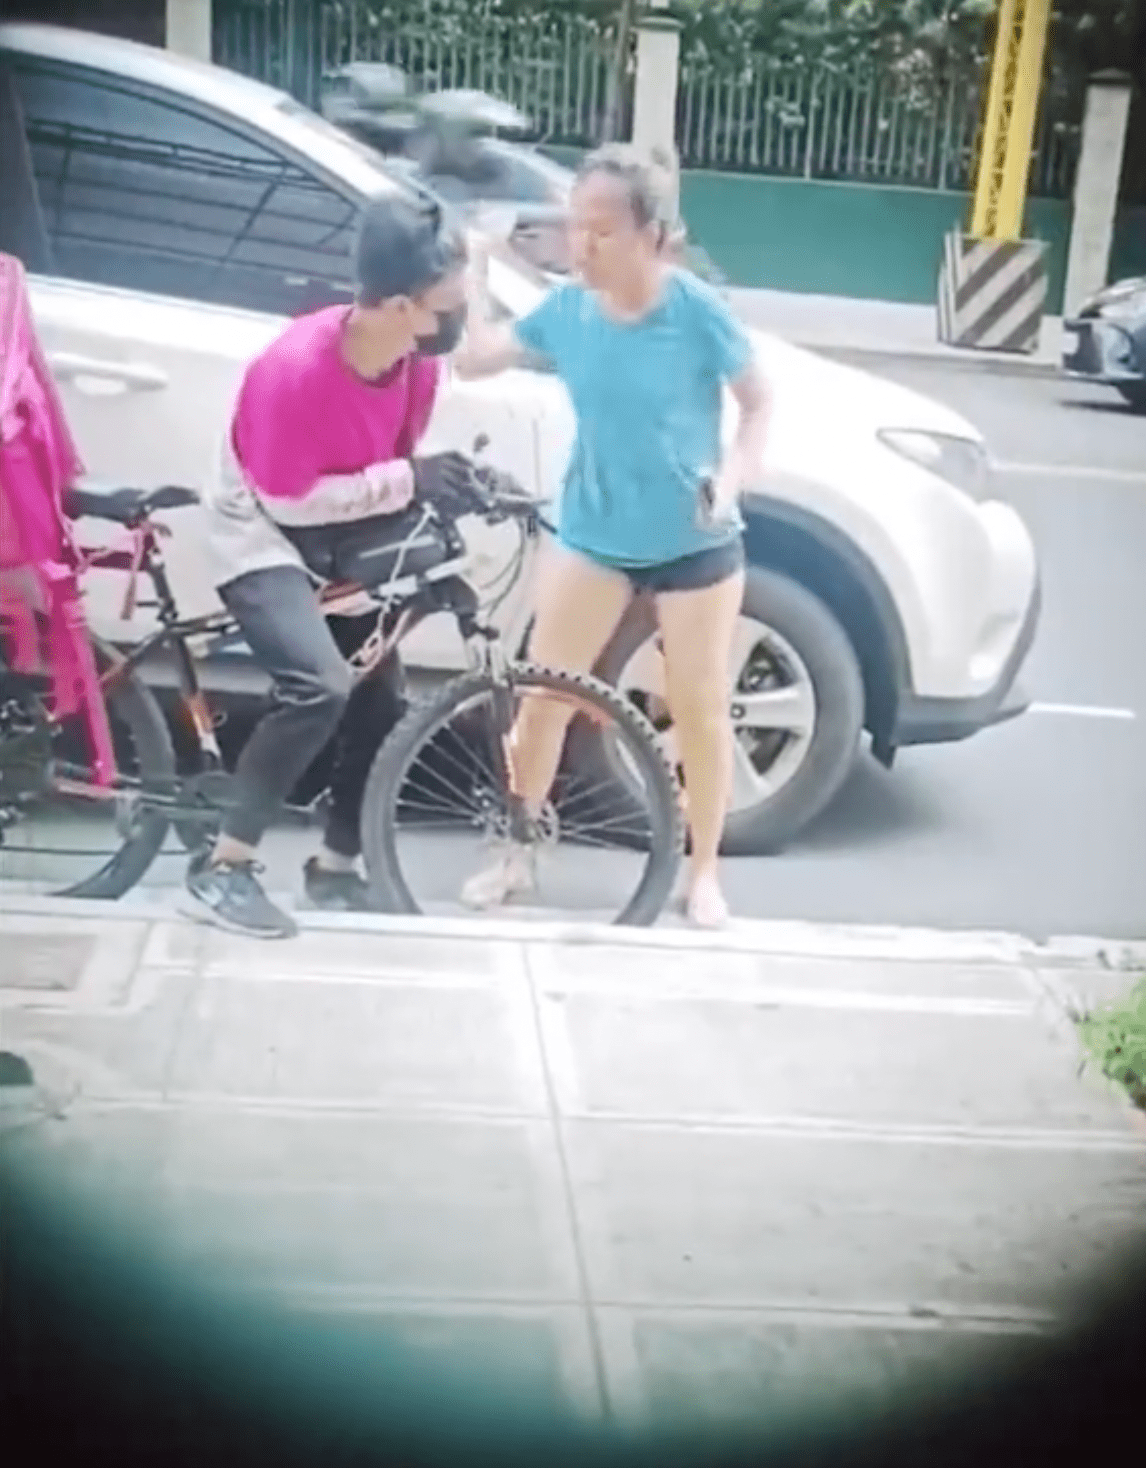 Woman kicks and slaps food delivery cyclist who accidentally scratched her car 02